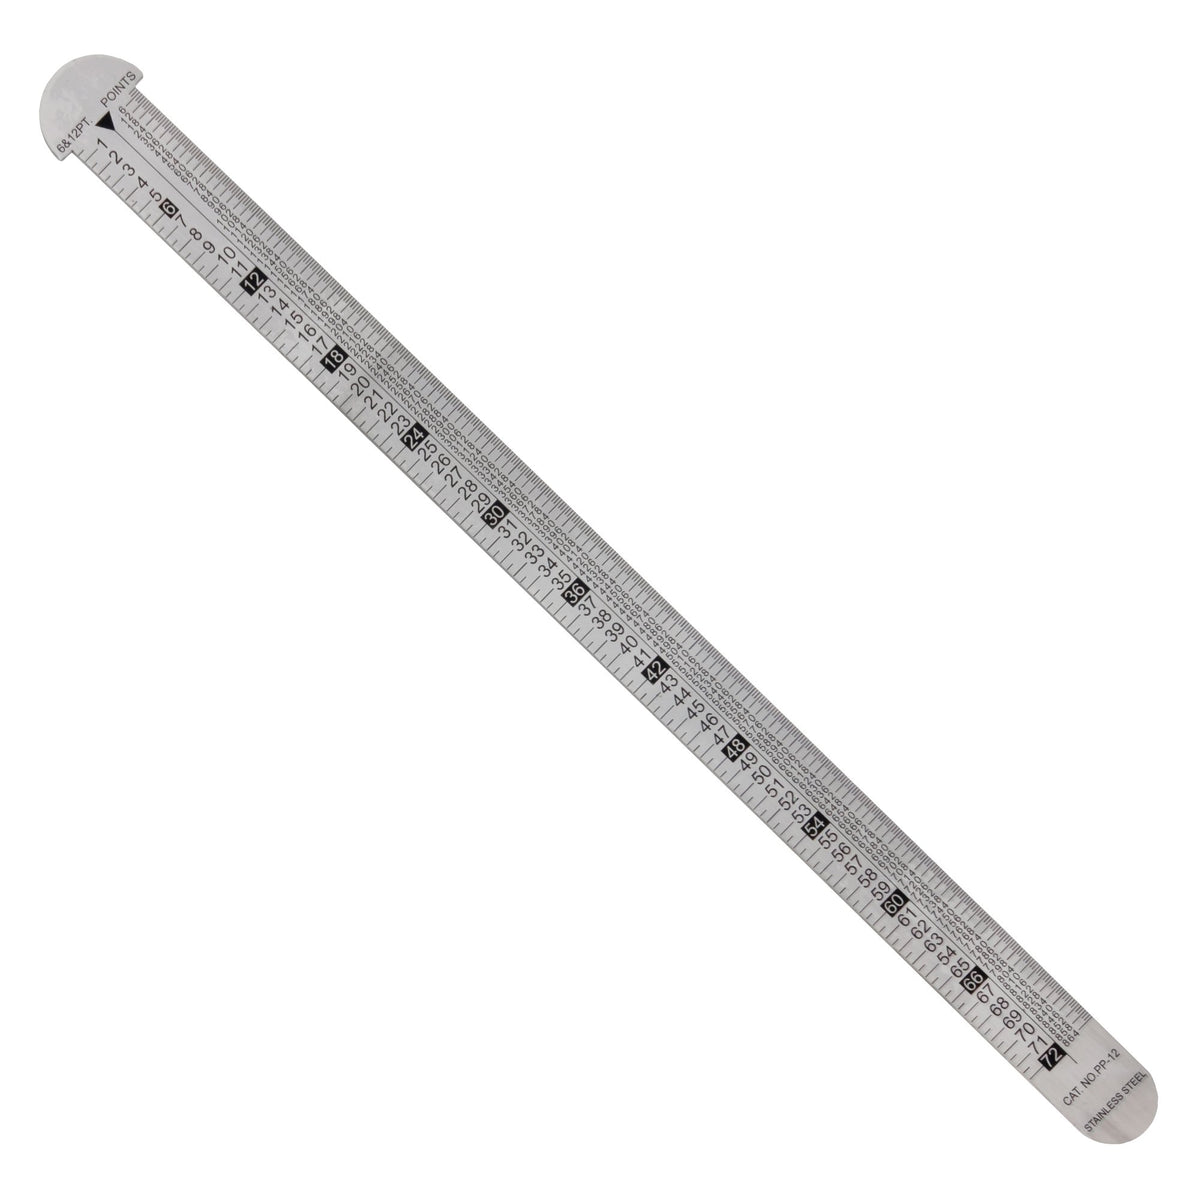 Pacific Arc, Pica Pole Metal Ruler, with Pica, Points, Inches, and Agate Measurements, Stainless Steel Ruler for Drafting